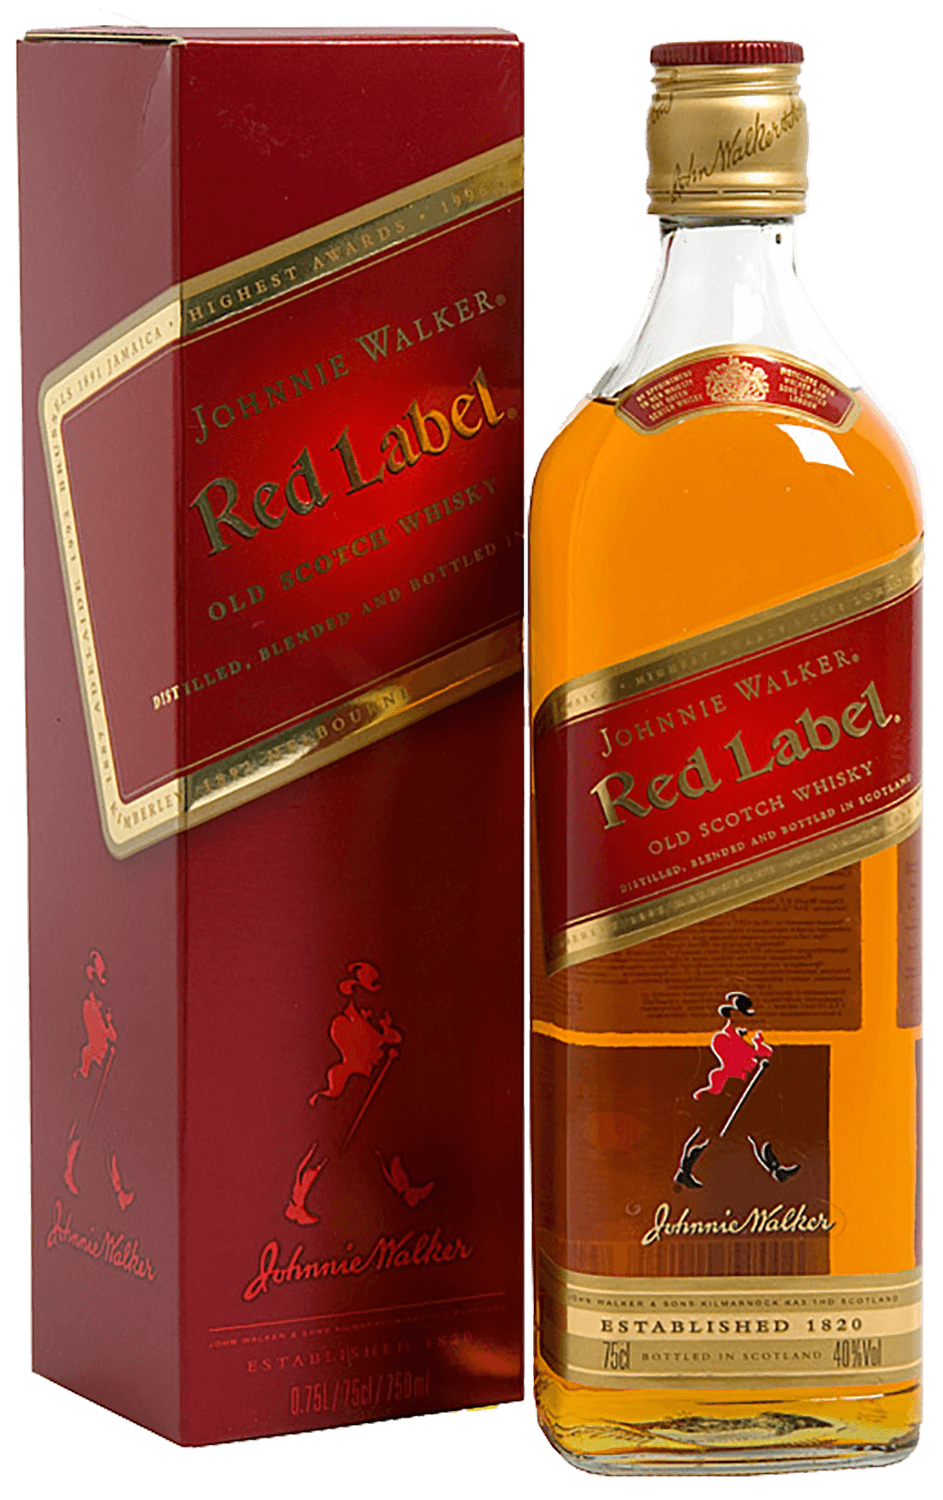 Johnnie Walker Red Label Blended Scotch Whisky (gift box) johnnie walker blue label blended scotch whisky gift box